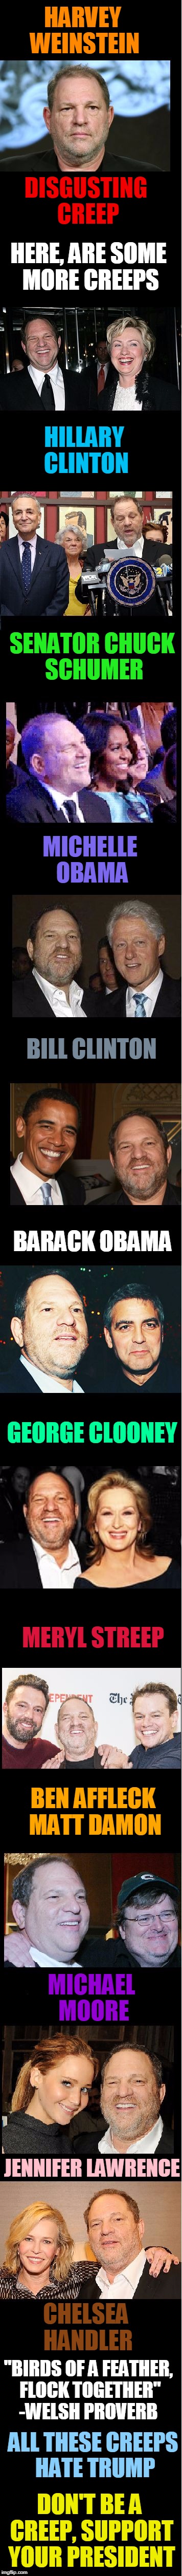 CREEPS! |  HARVEY WEINSTEIN; DISGUSTING CREEP; HERE, ARE SOME MORE CREEPS; HILLARY CLINTON; SENATOR CHUCK SCHUMER; MICHELLE OBAMA; BILL CLINTON; BARACK OBAMA; GEORGE CLOONEY; MERYL STREEP; BEN AFFLECK MATT DAMON; MICHAEL MOORE; JENNIFER LAWRENCE; CHELSEA HANDLER; "BIRDS OF A FEATHER, FLOCK TOGETHER" -WELSH PROVERB; ALL THESE CREEPS HATE TRUMP; DON'T BE A CREEP,
SUPPORT YOUR PRESIDENT | image tagged in creeps,funny,memes,mxm | made w/ Imgflip meme maker